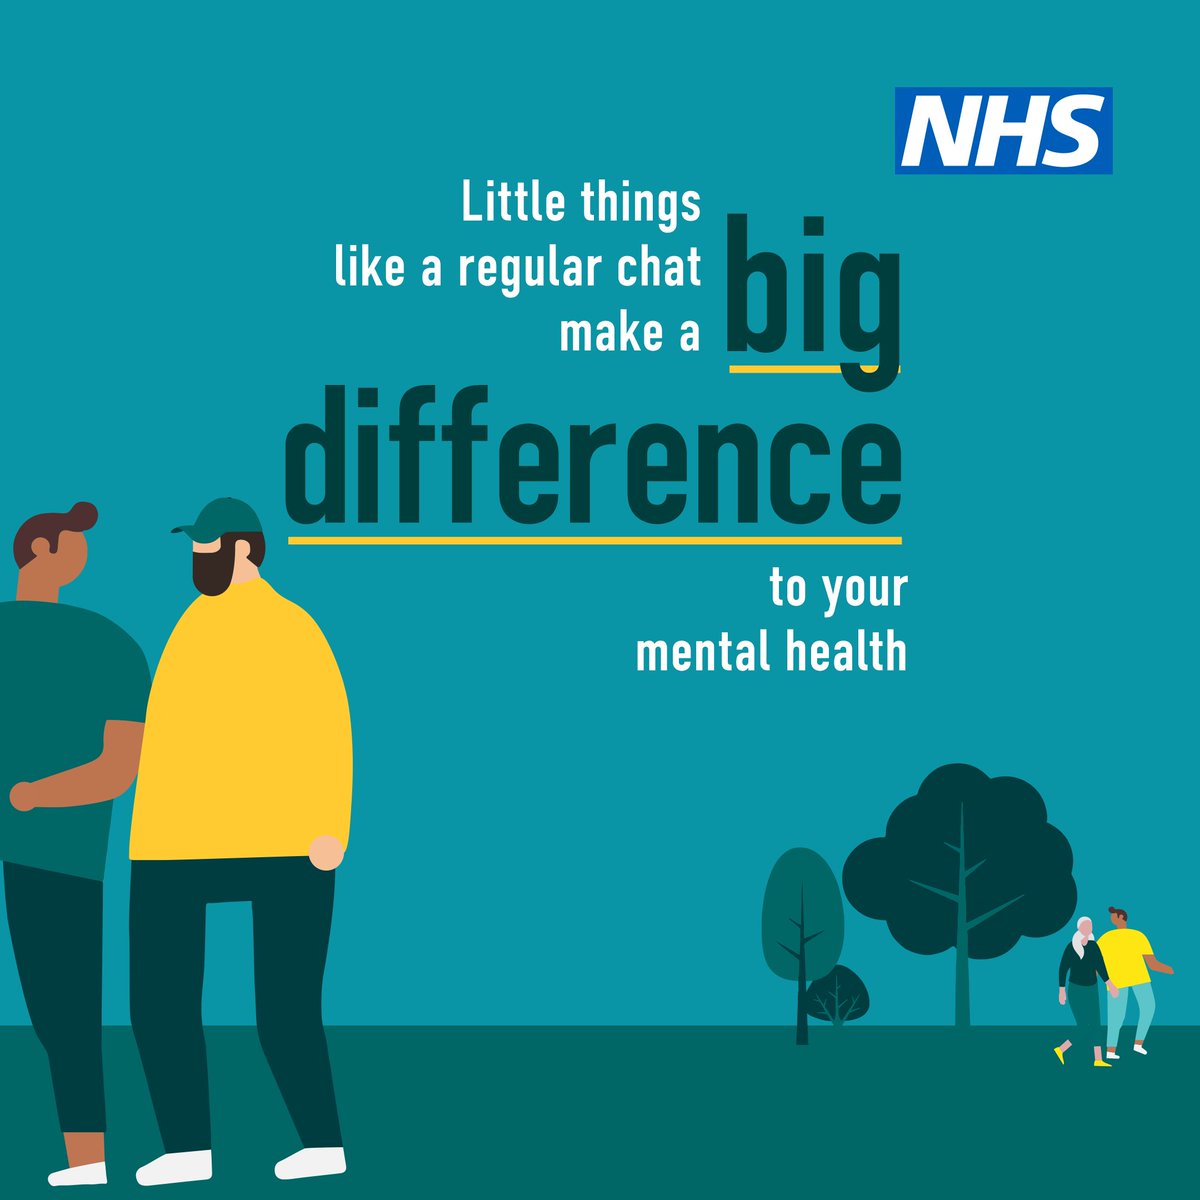 Talking to someone about how you are feeling can improve your mental health and wellbeing. Little things can make a big difference. Find out more ➡️ nhs.uk/every-mind-mat… #TimeToTalk